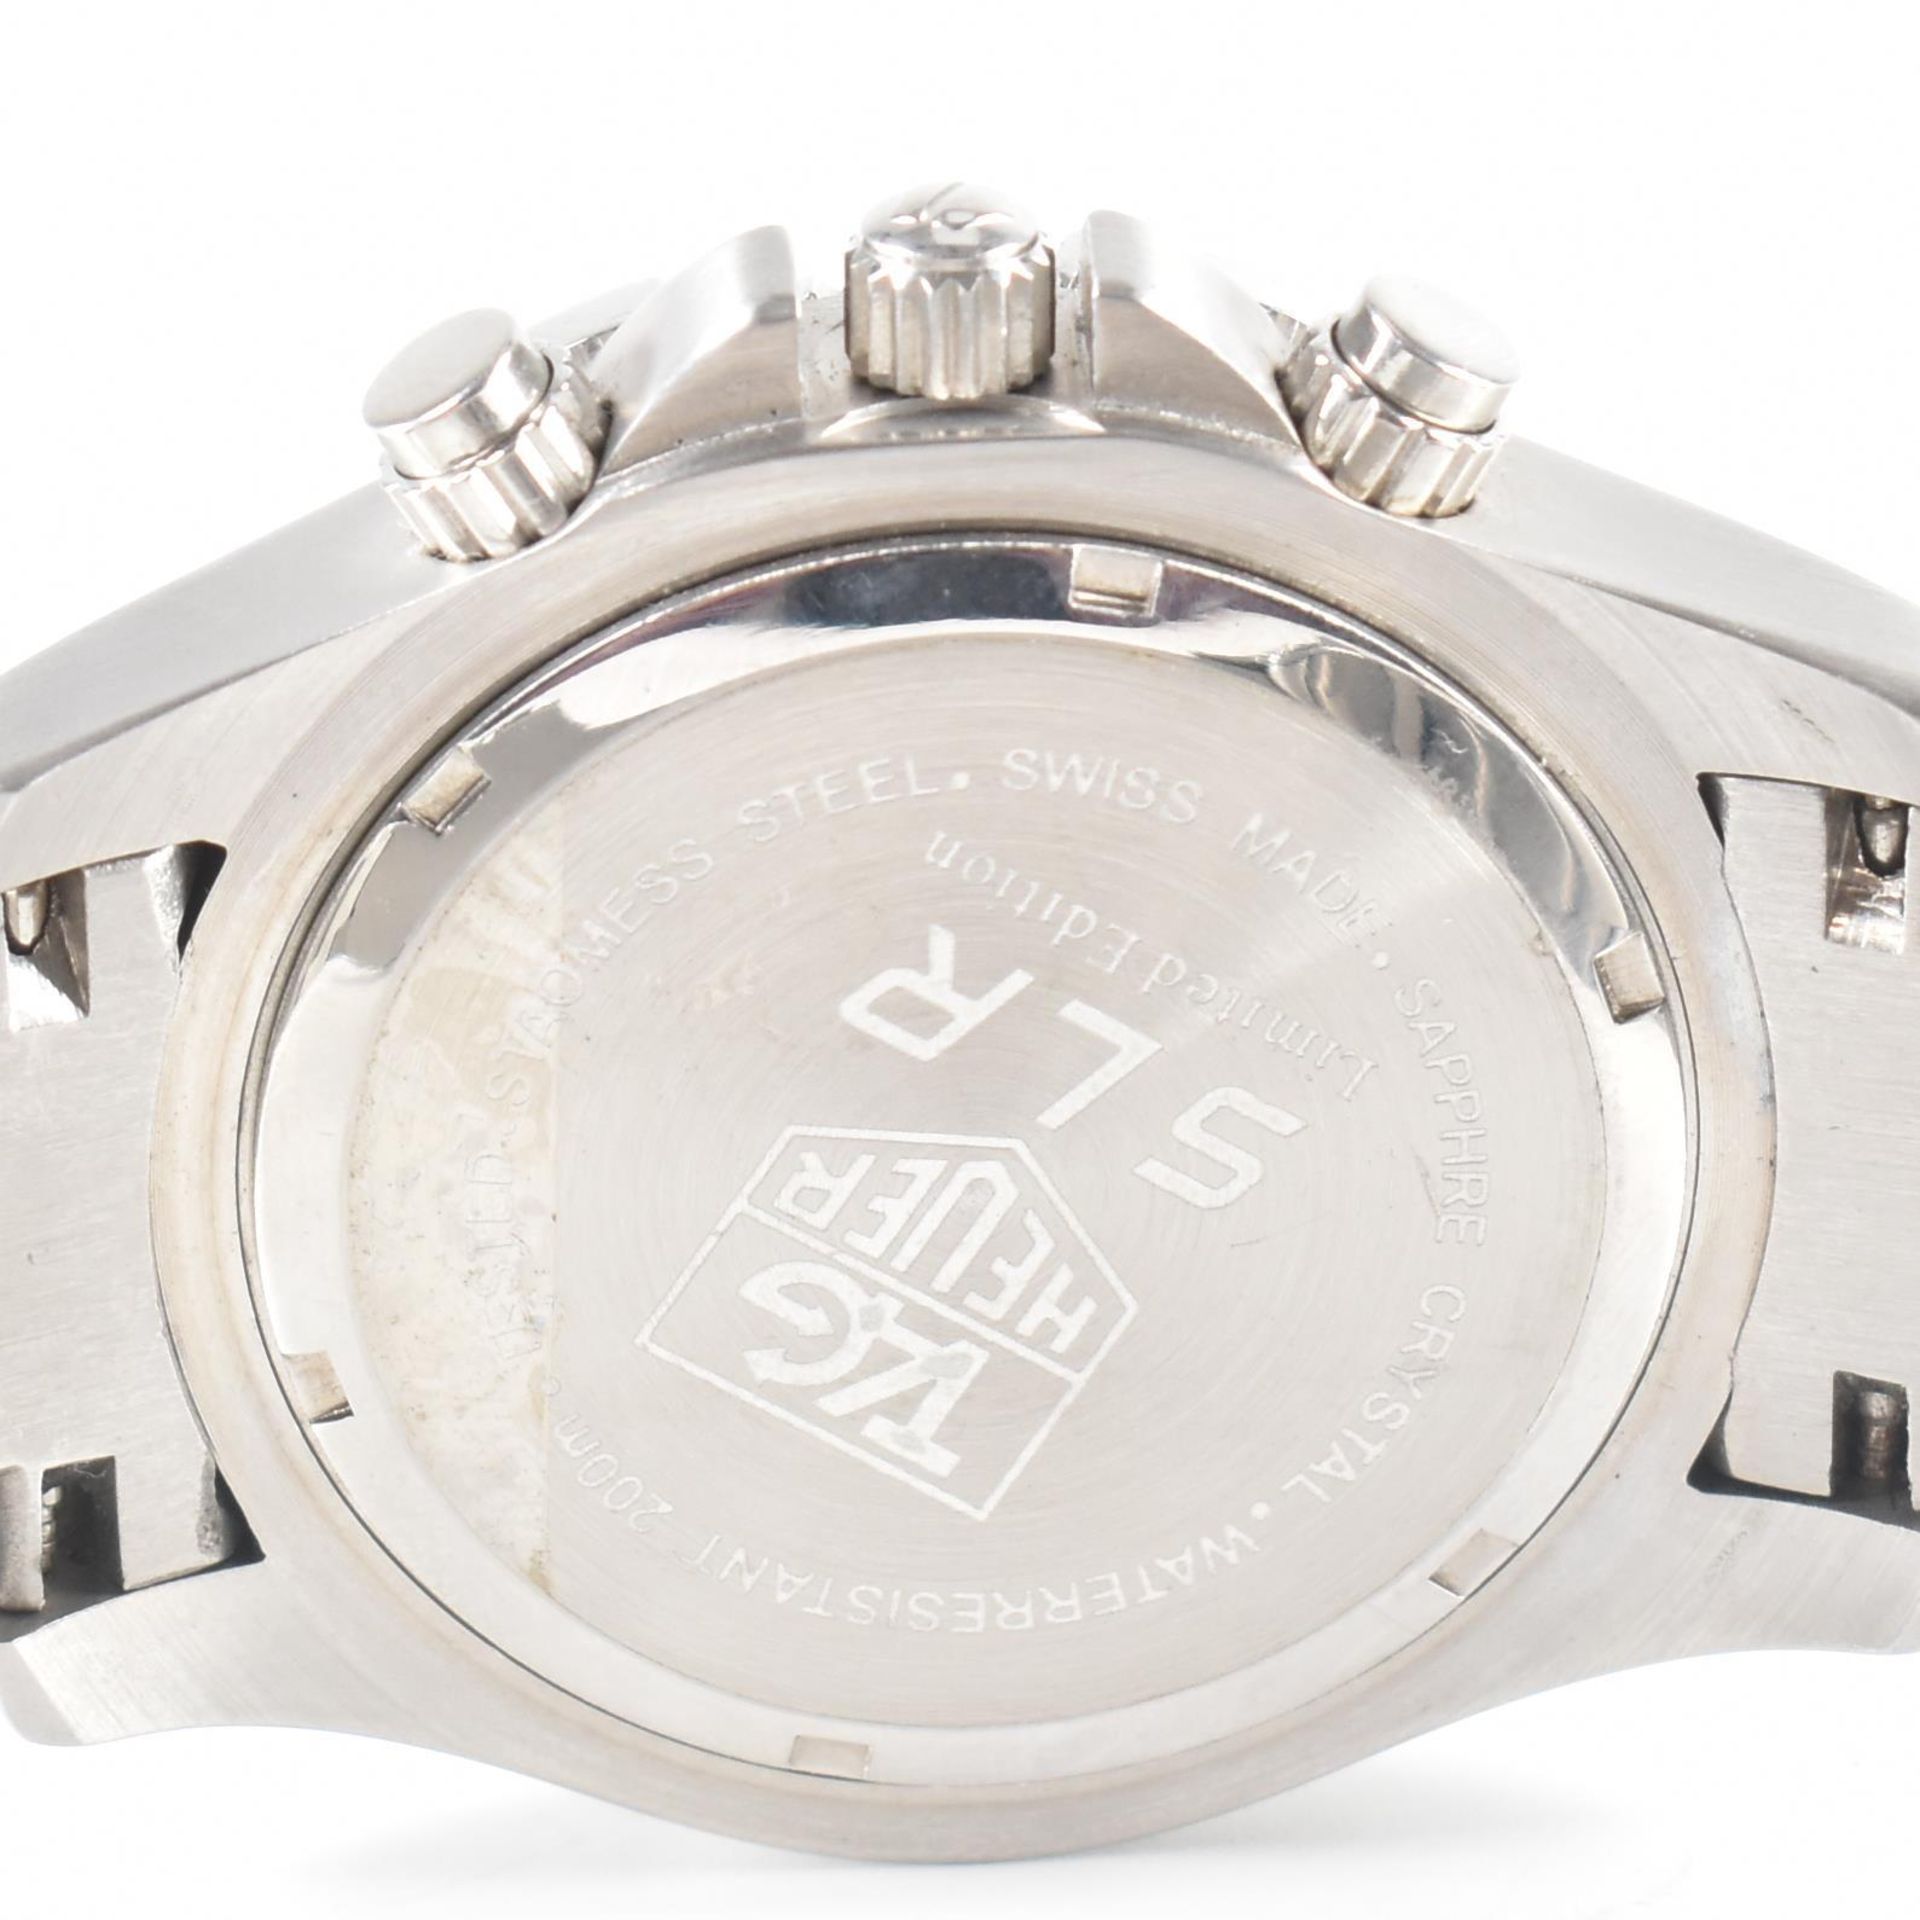 TAG HEUER SLR LIMITED EDITION WRIST WATCH - Image 4 of 6